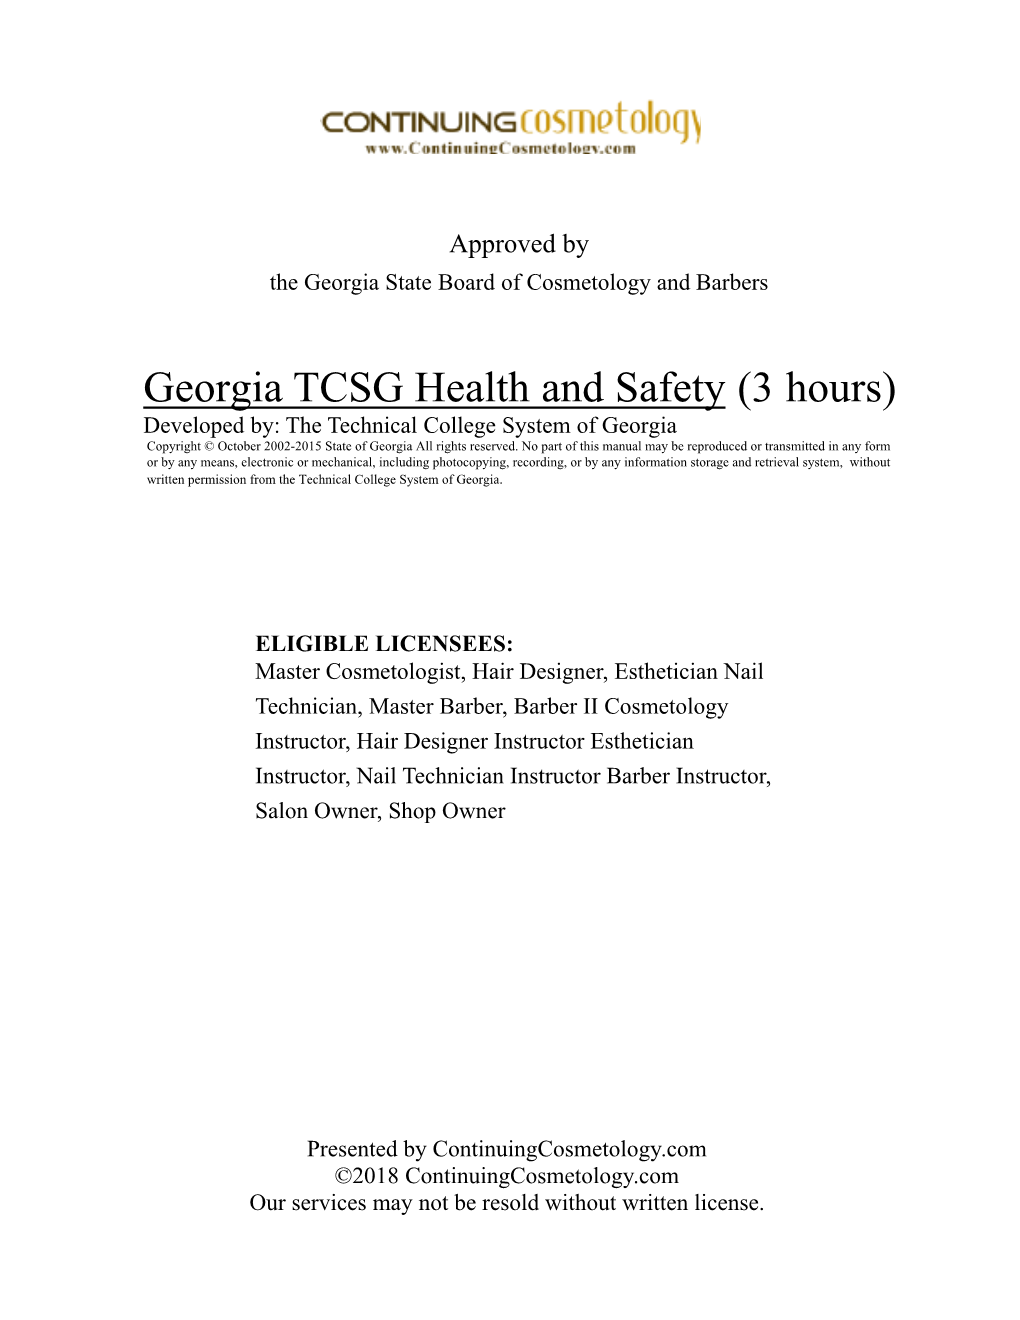 Georgia TCSG Health and Safety (3 Hours) Developed By: the Technical College System of Georgia Copyright © October 2002-2015 State of Georgia All Rights Reserved